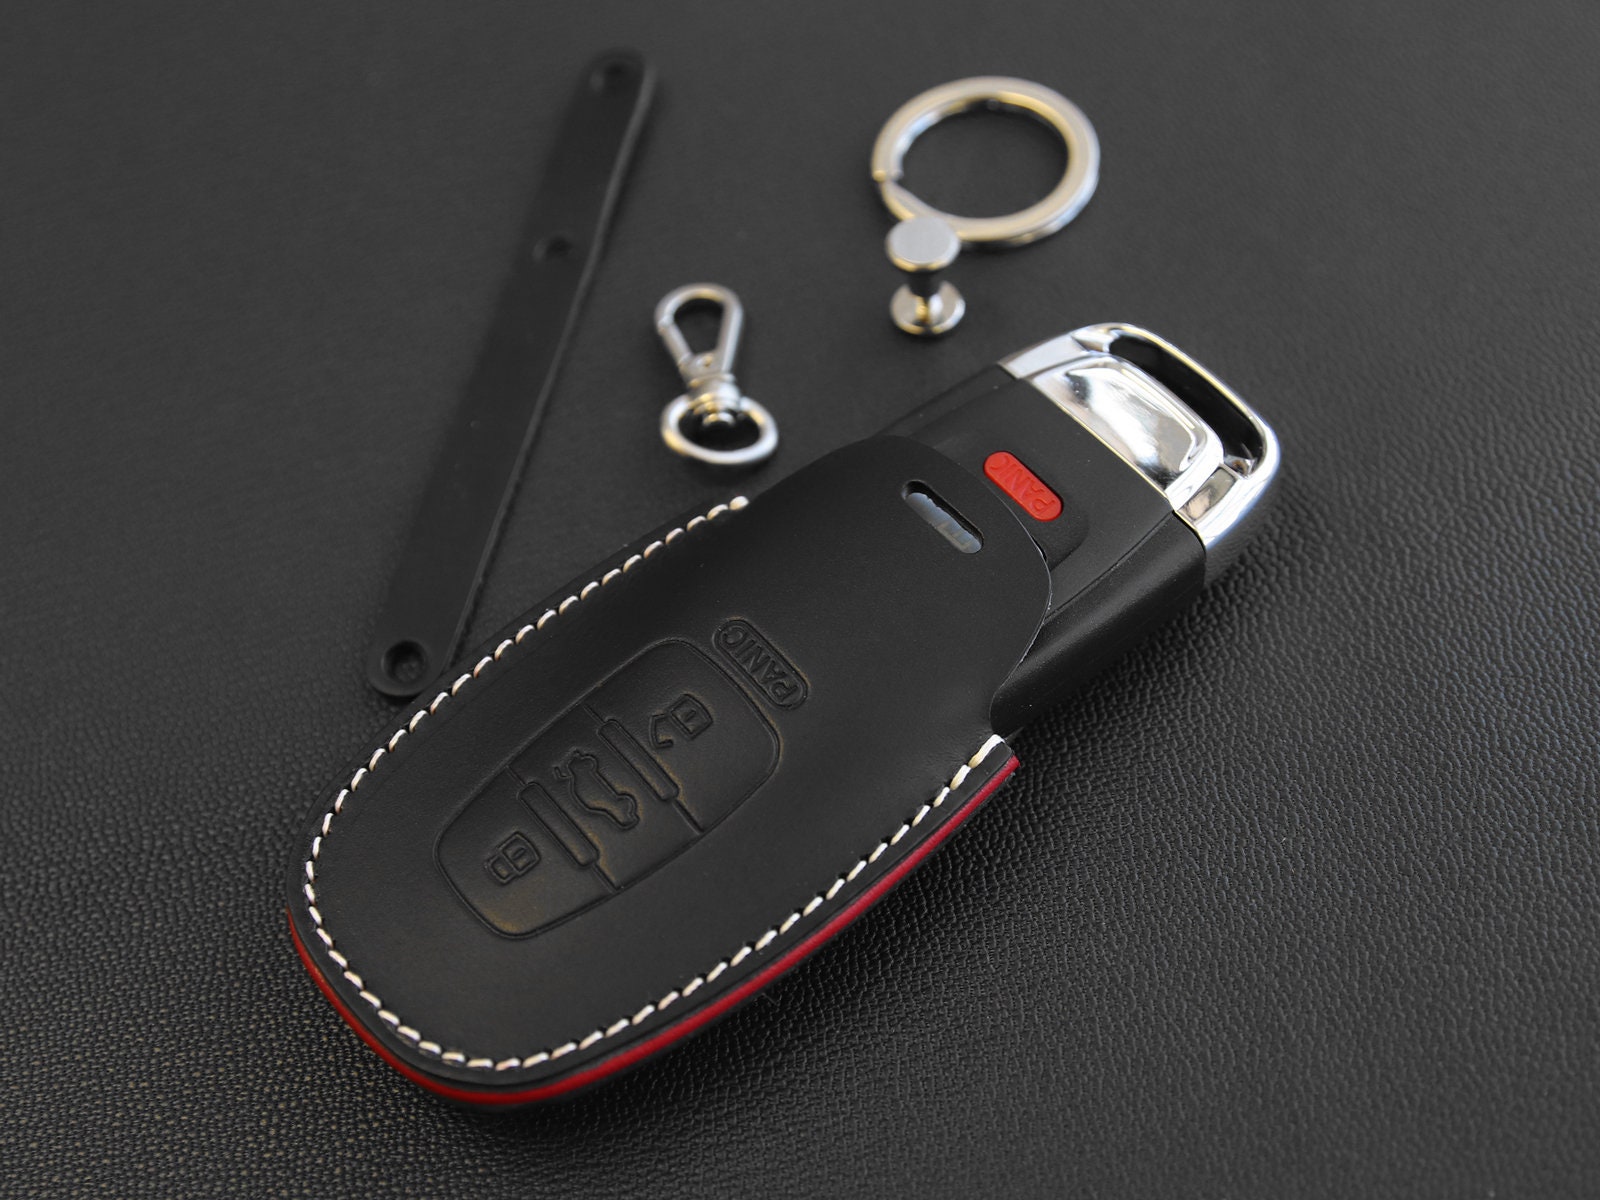 AR004 - ** NEW ** Audi Leather Key Case - BROWN 